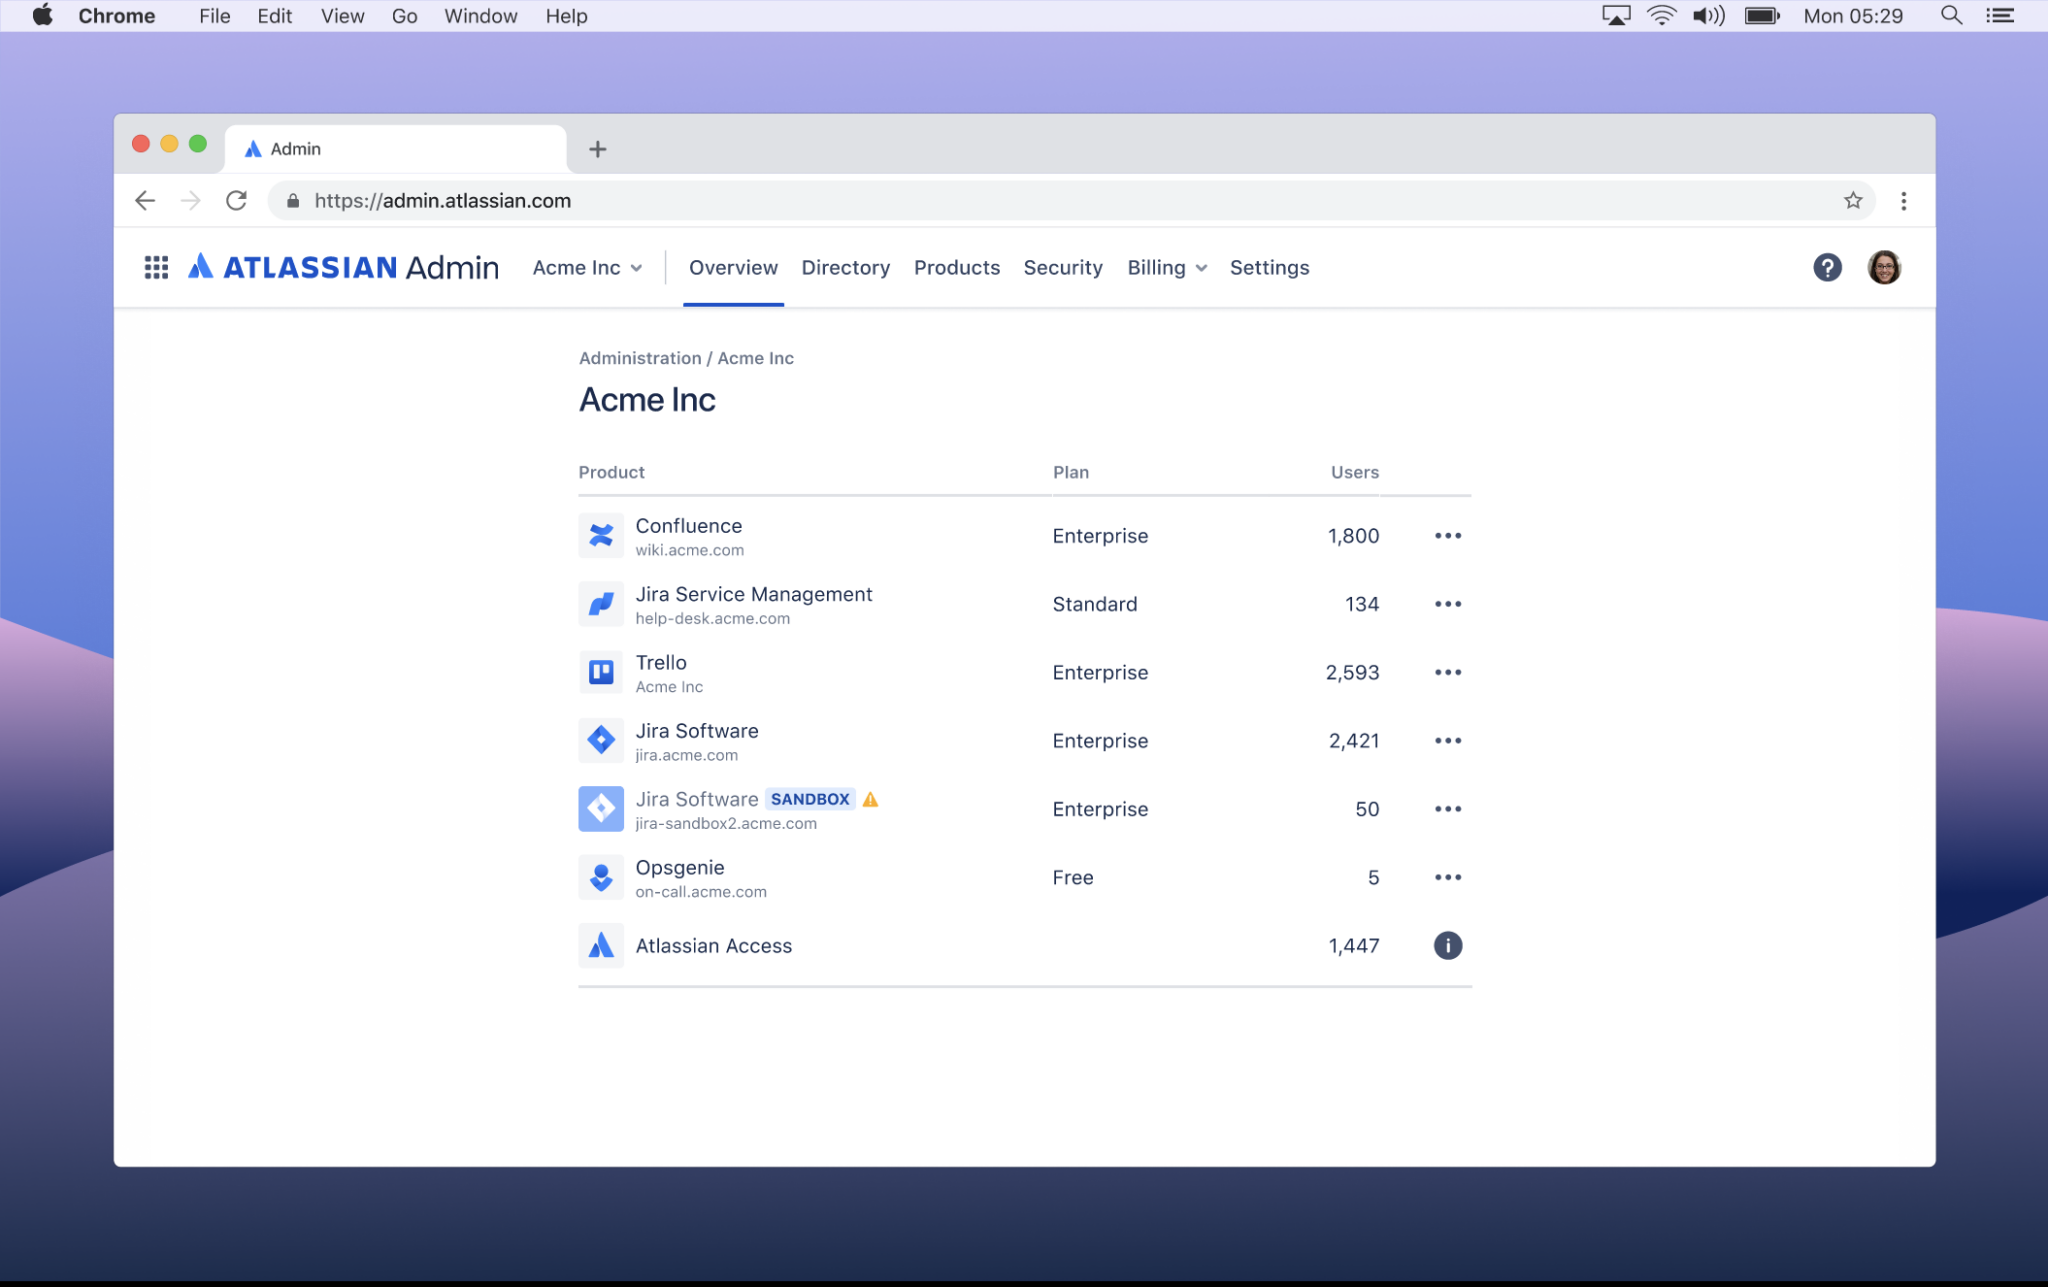 Image description: In the Overview page of the Atlassian Administration hub, admins can now see Trello listed along with their other Atlassian products managed at their company.